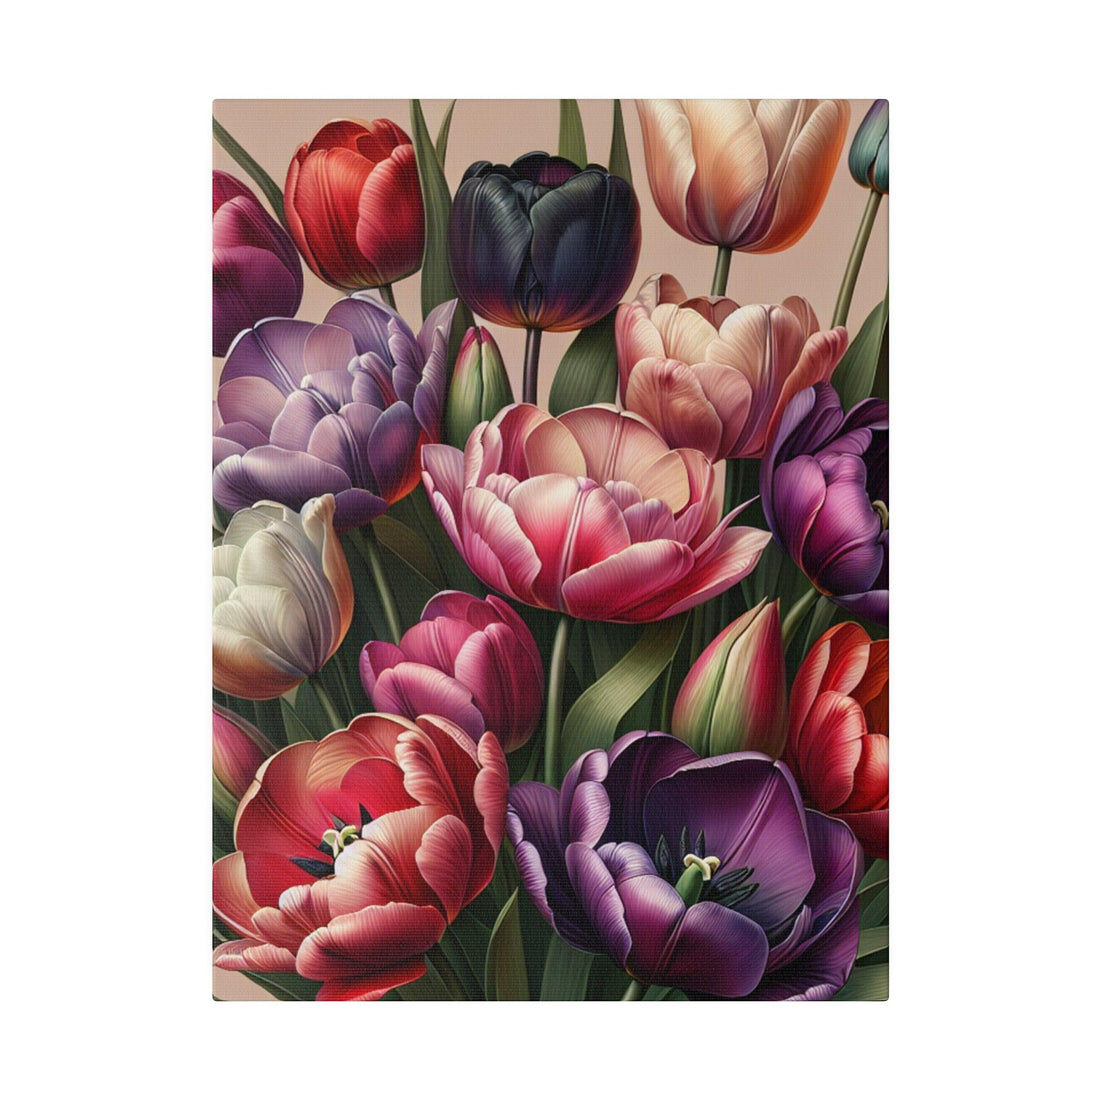 "Blooming Elegance: Tulip Symphony Canvas Wall Art" - The Alice Gallery